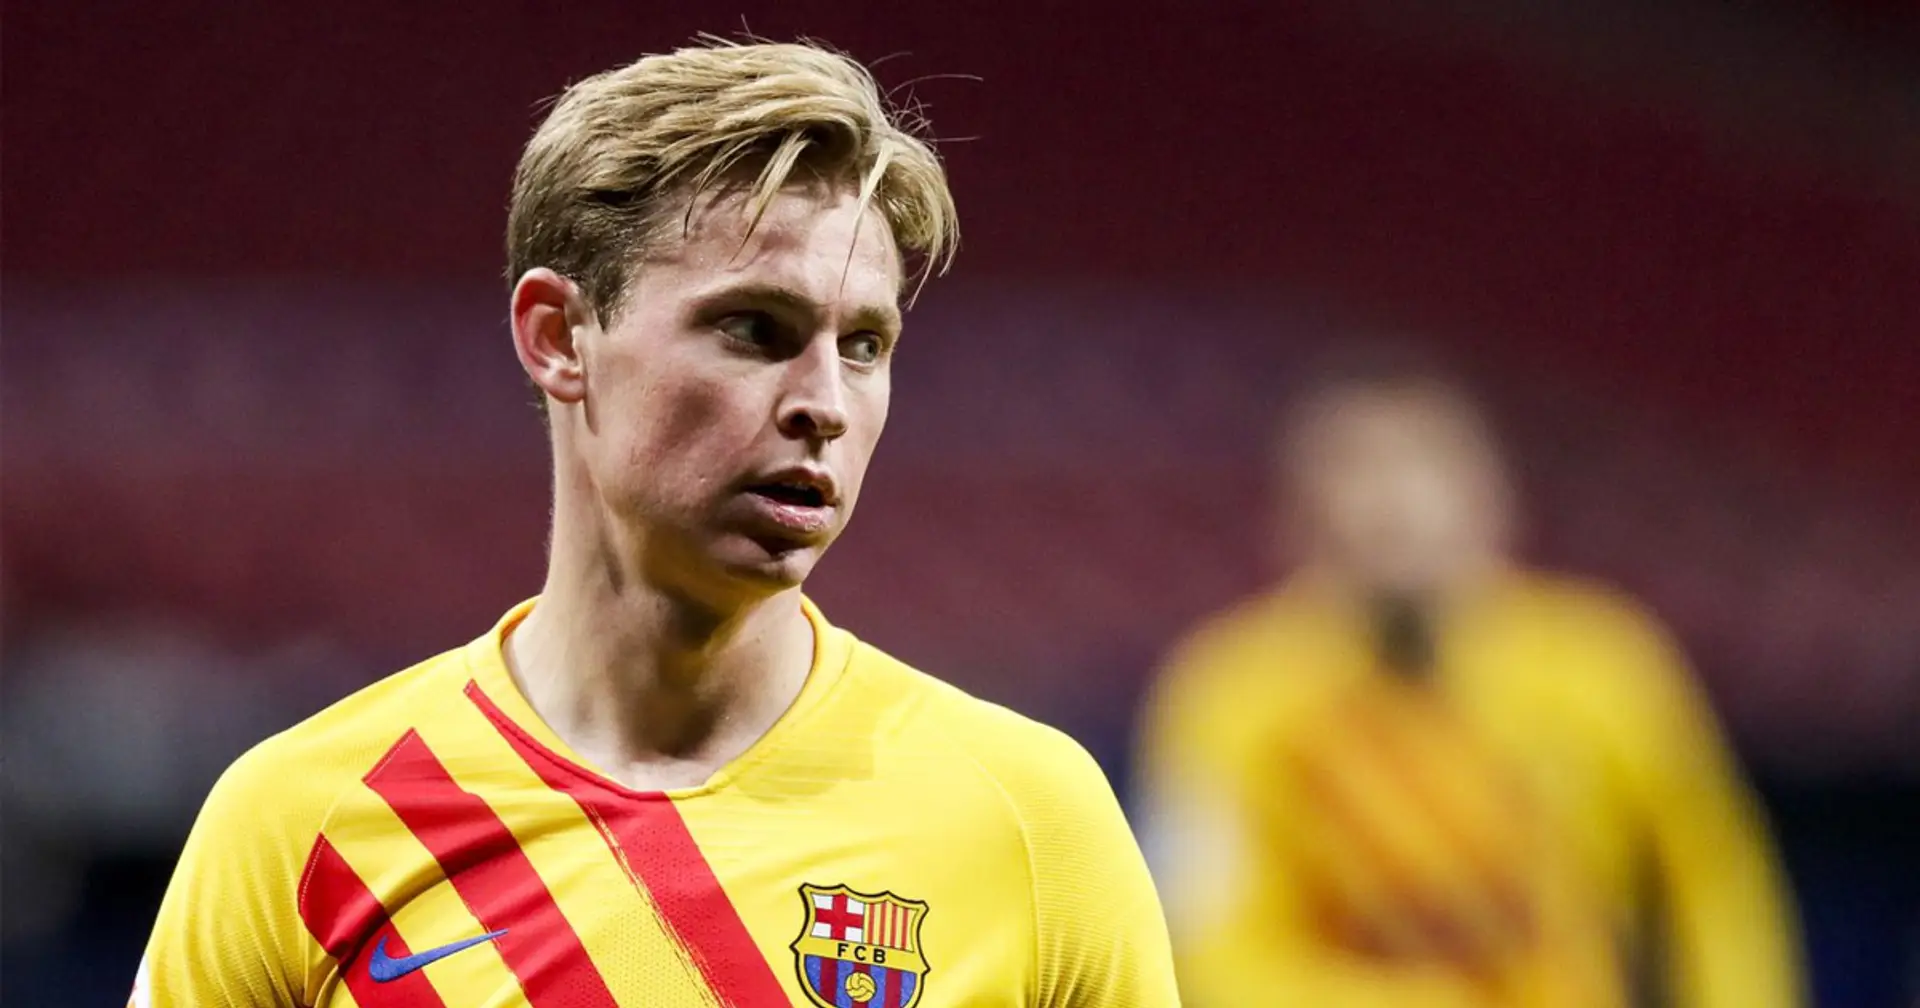 Frenkie de Jong leads La Liga chart for most successful passes in 2020/21, Alba and Busquets also in top-5